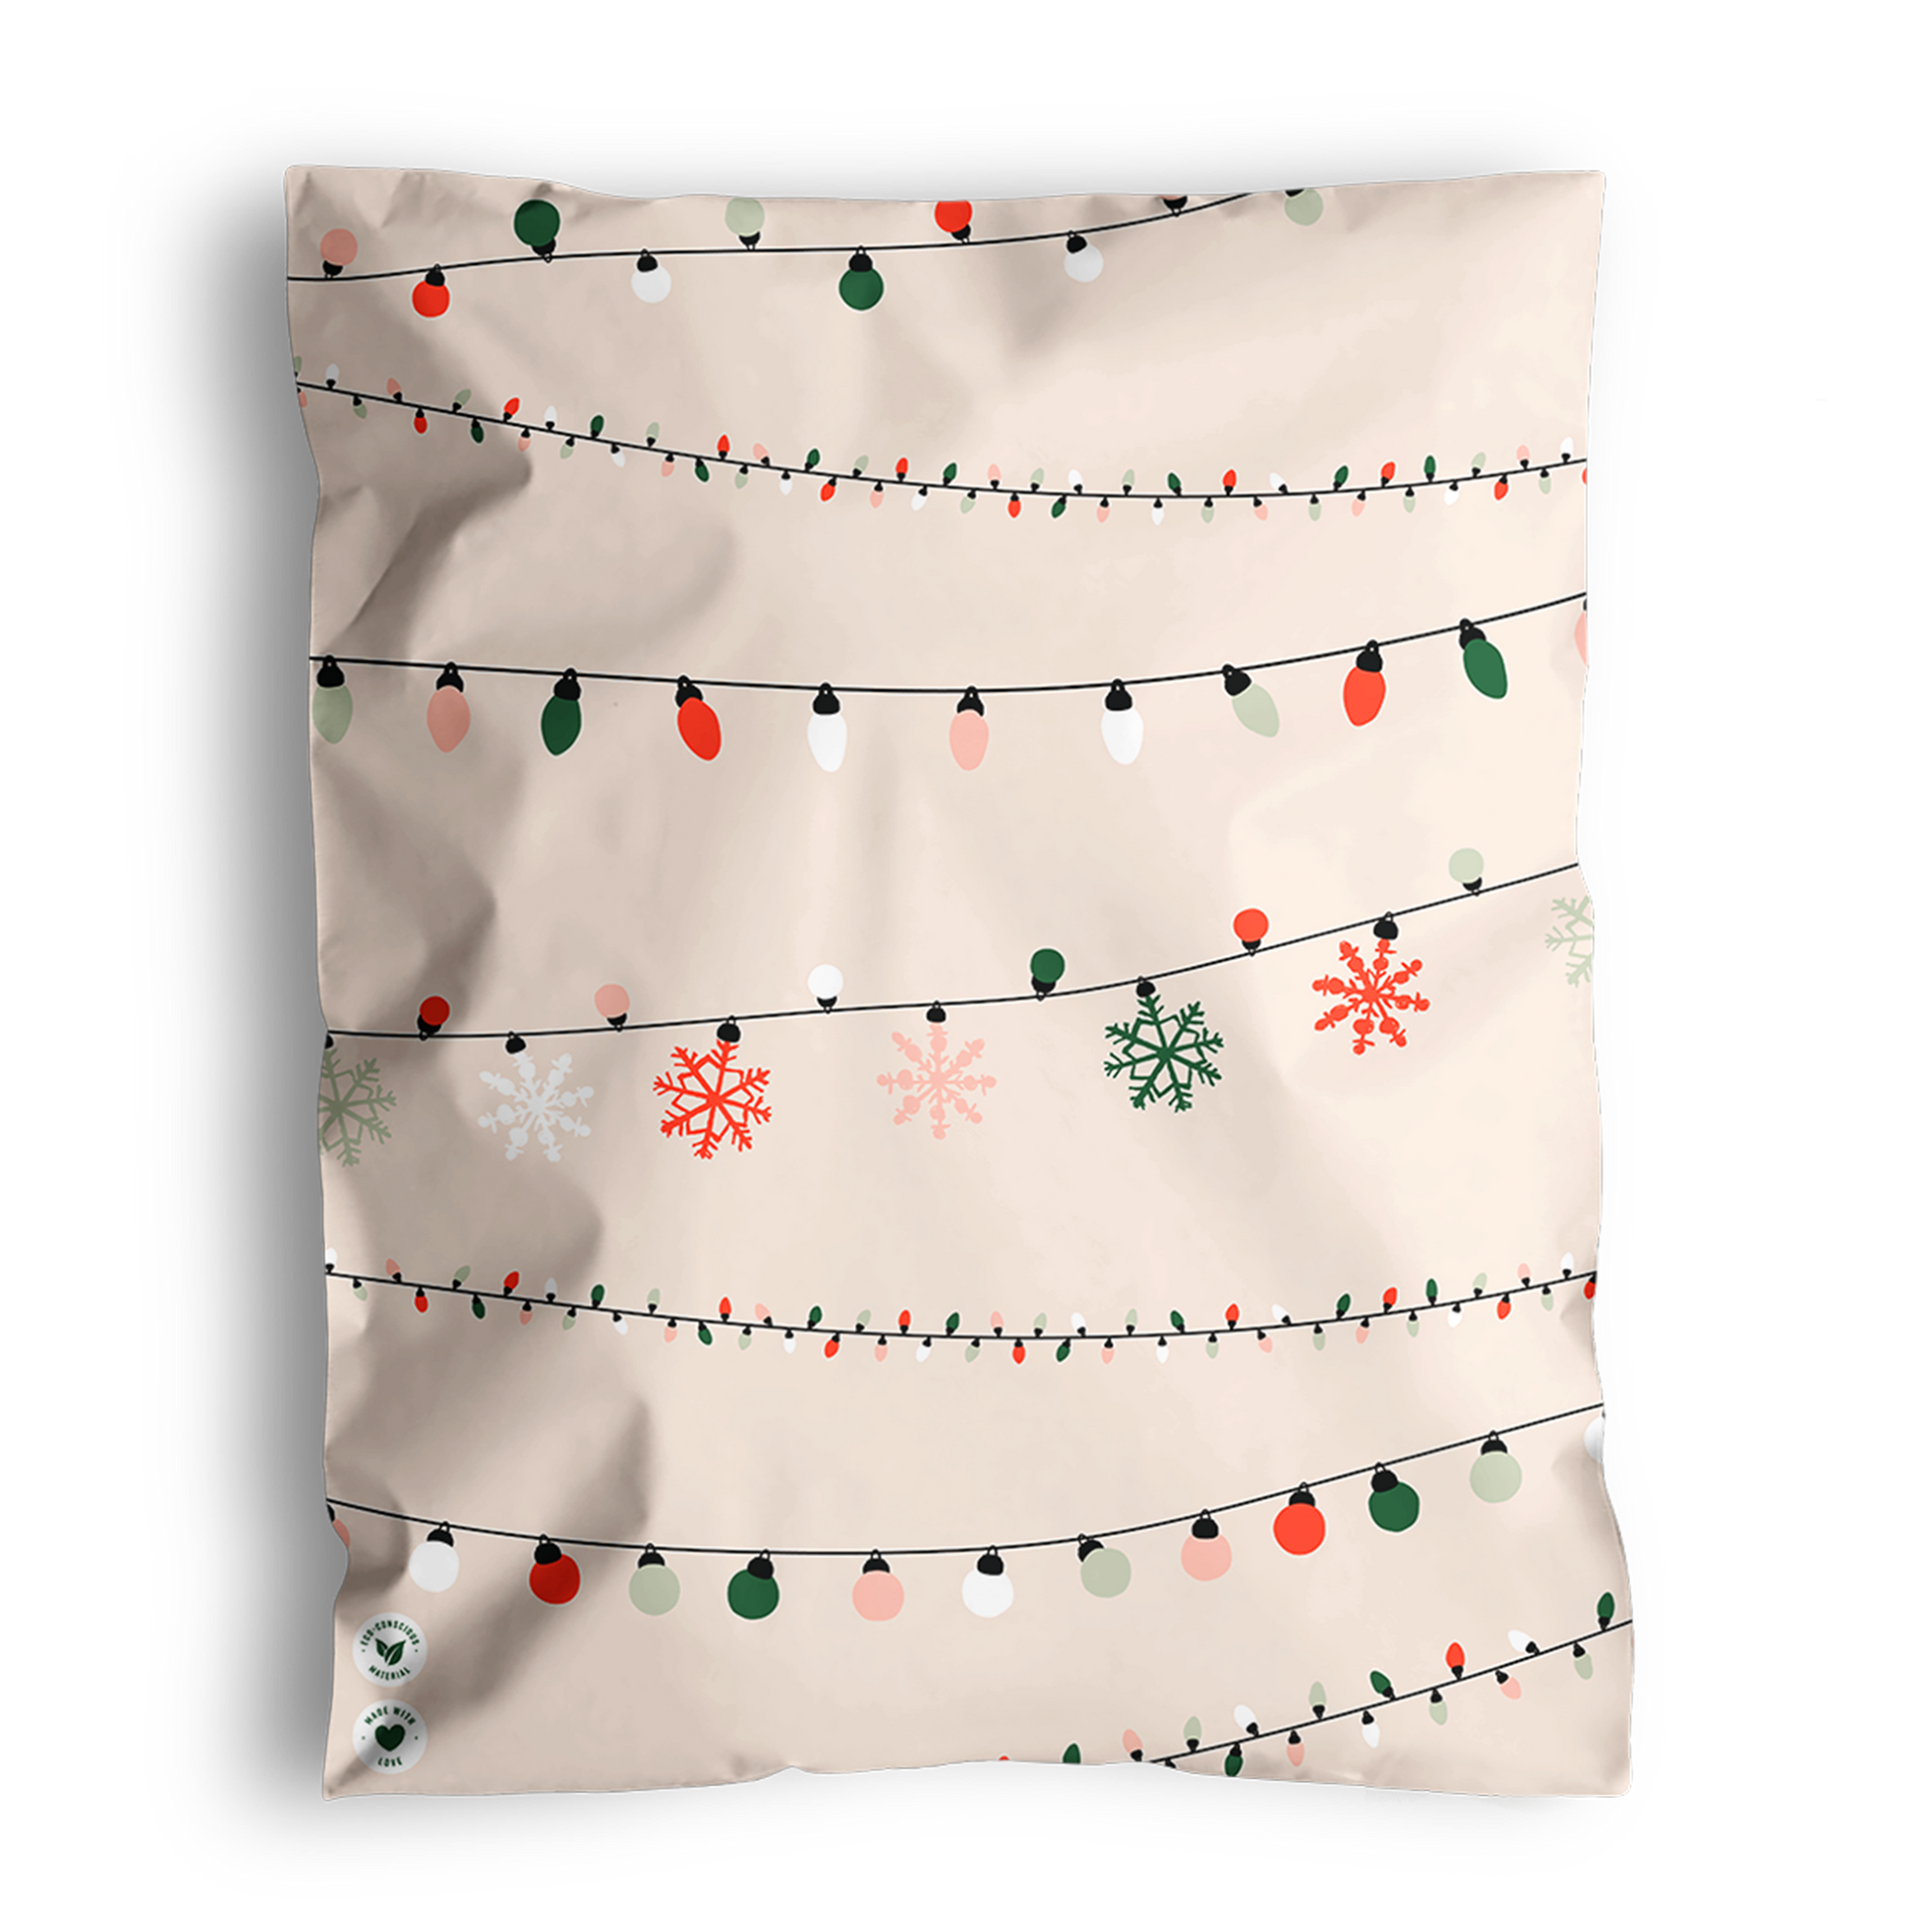 A festive cushion featuring a design of colorful impack.co Christmas Light Strings Biodegradable Mailers 14.5" x 19 and snowflakes on a beige background.